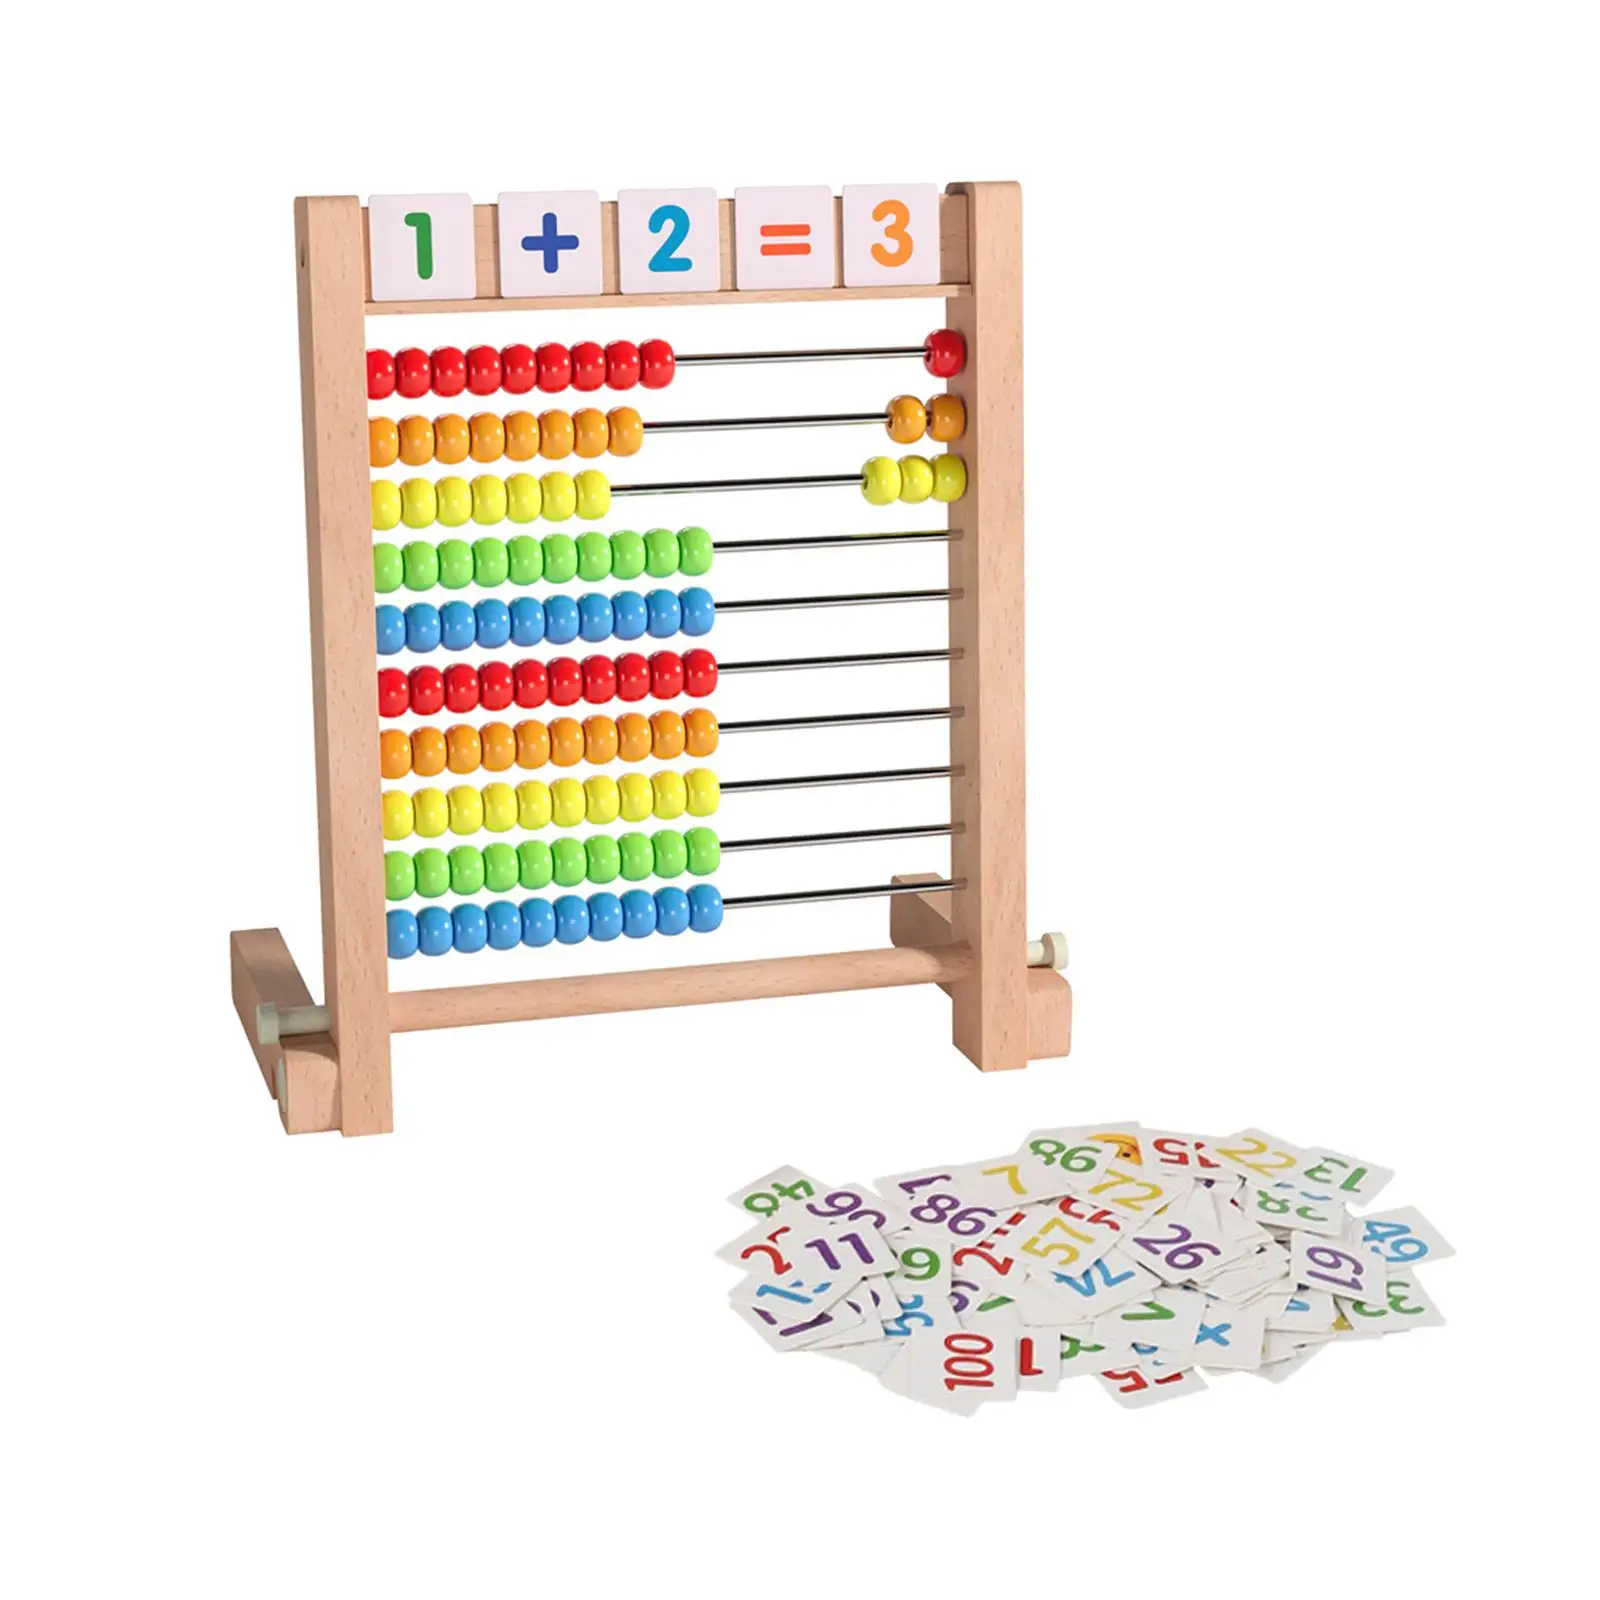 Colorful Wooden Abacus Ten Frame Set Montessori Educational Counting Toy for Children Elementary Preschool Kindergarten Learning